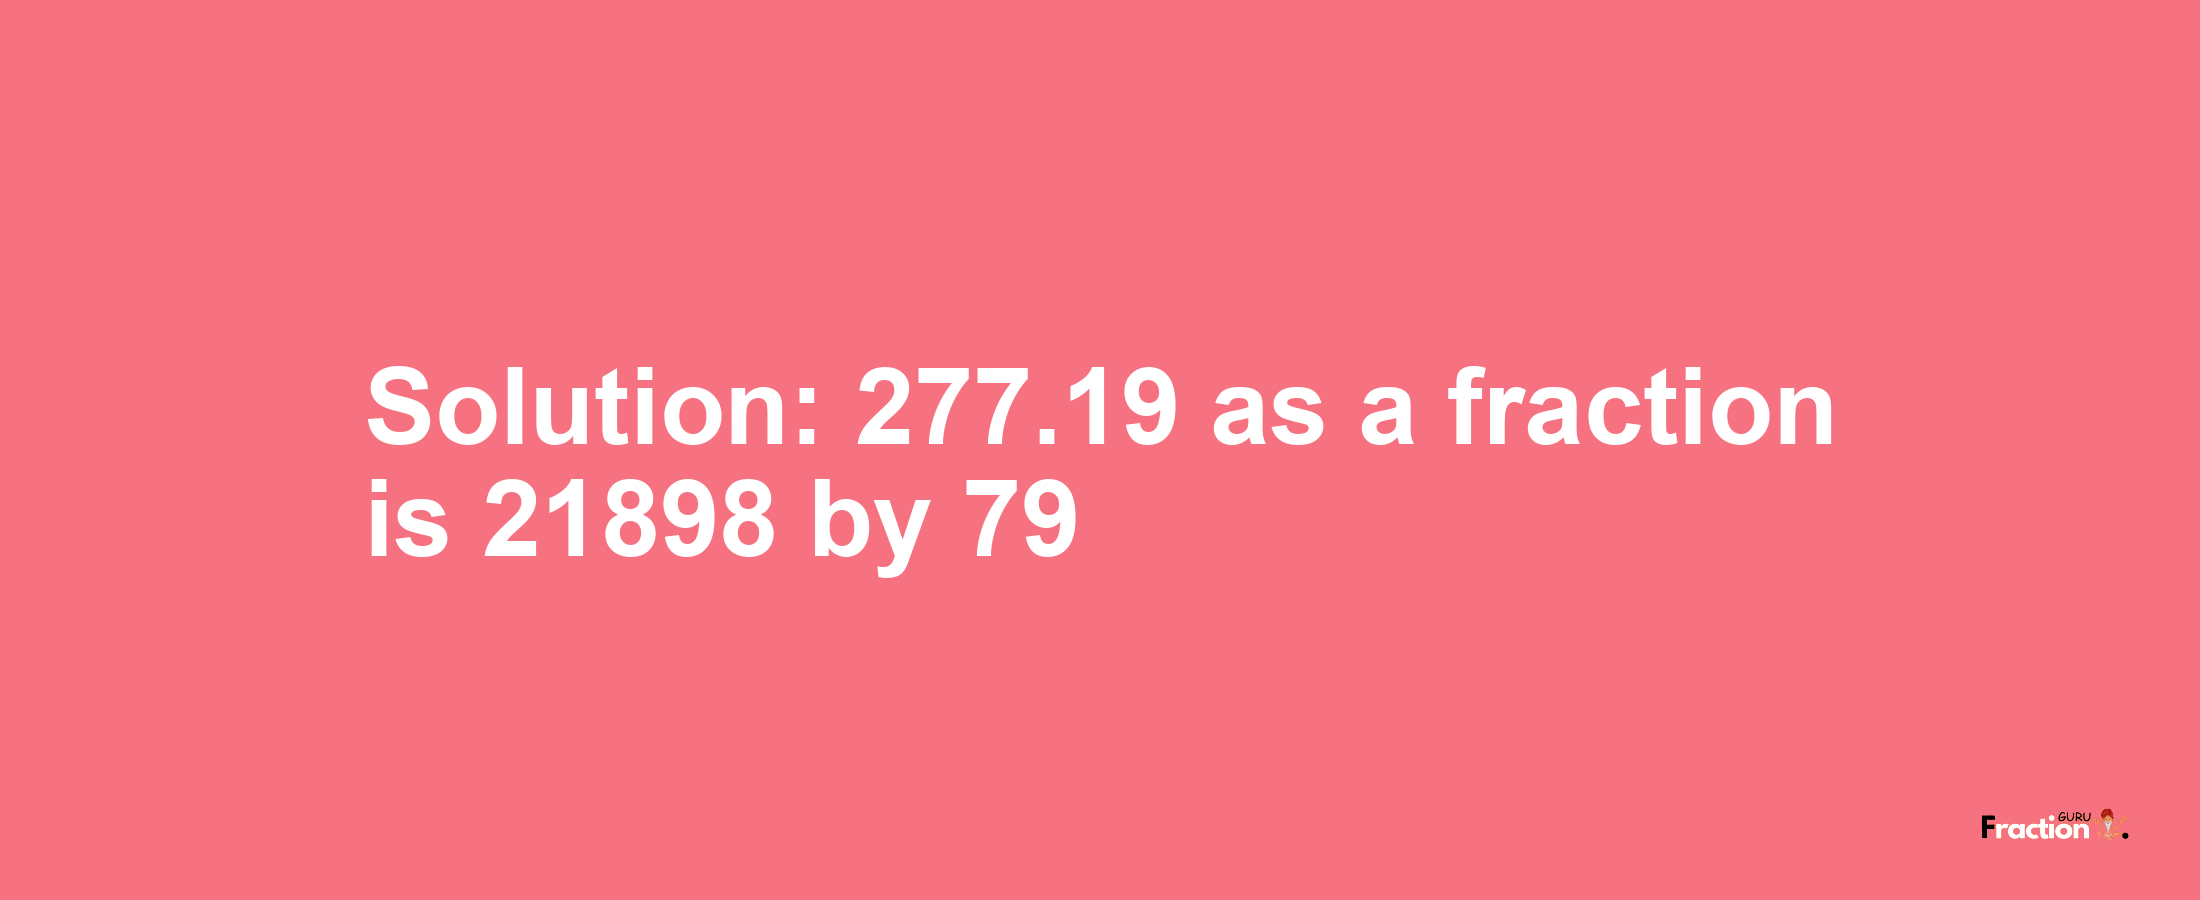 Solution:277.19 as a fraction is 21898/79